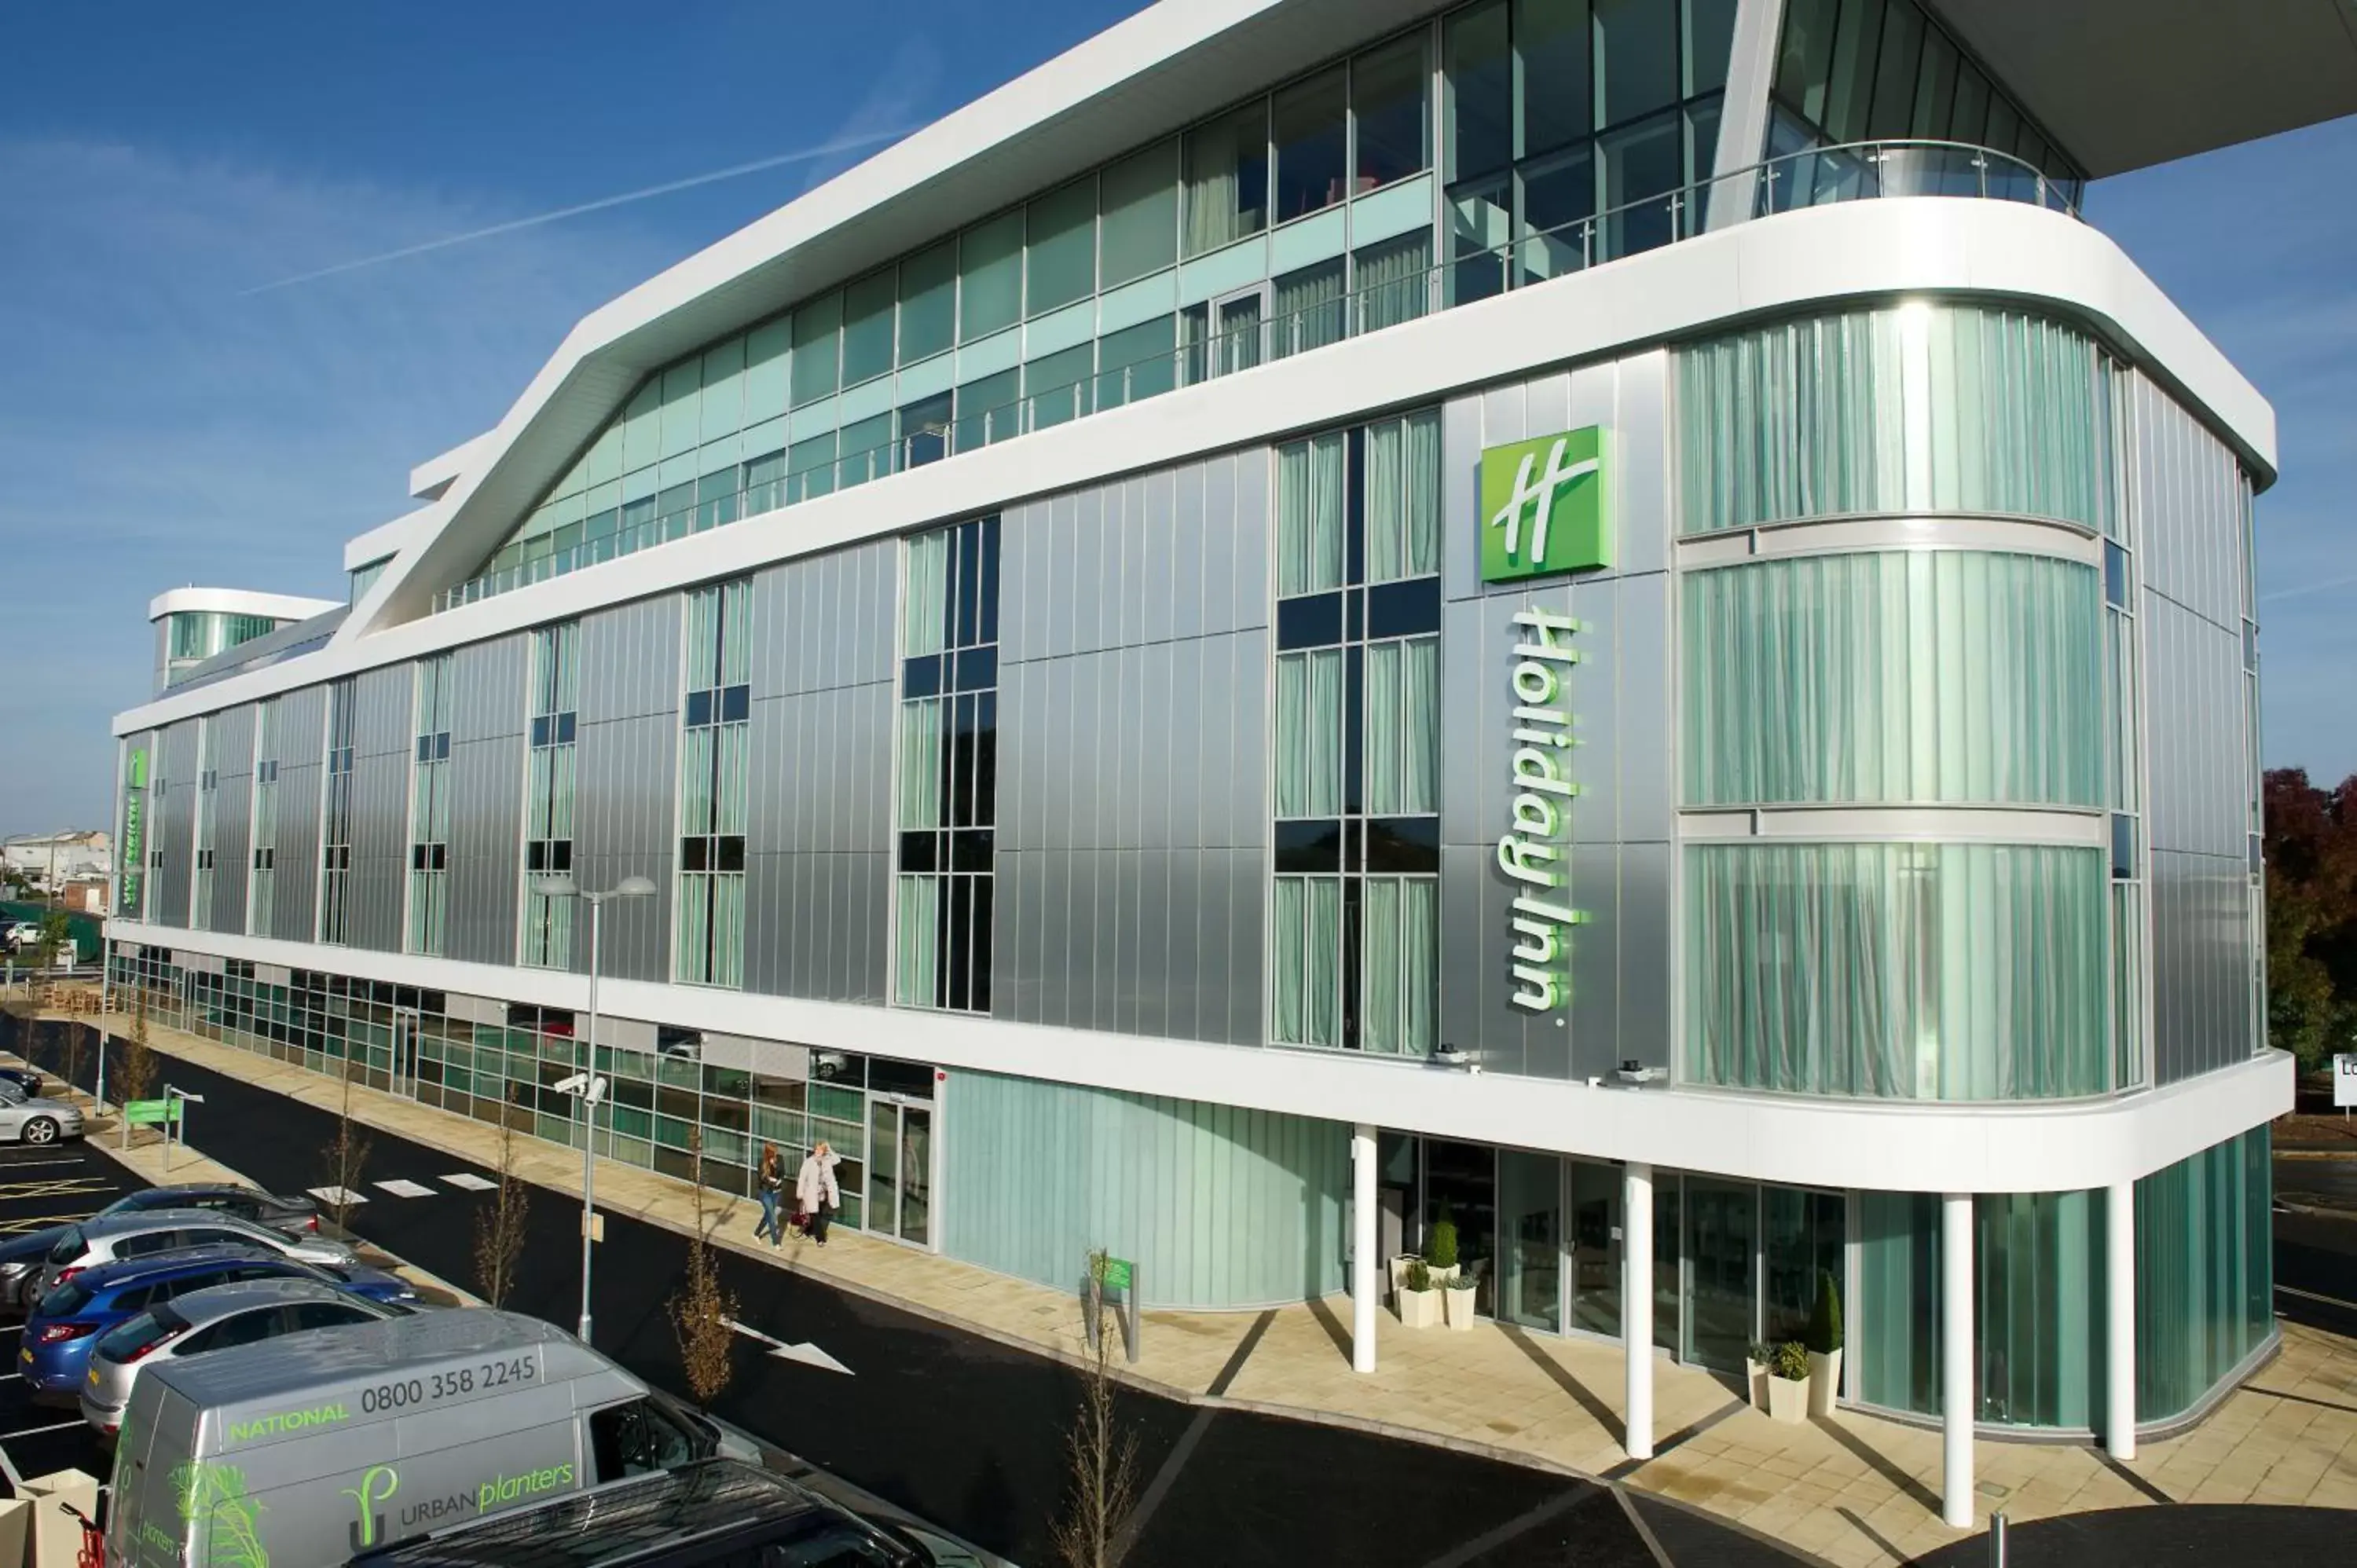 Property building in Holiday Inn Southend, an IHG Hotel